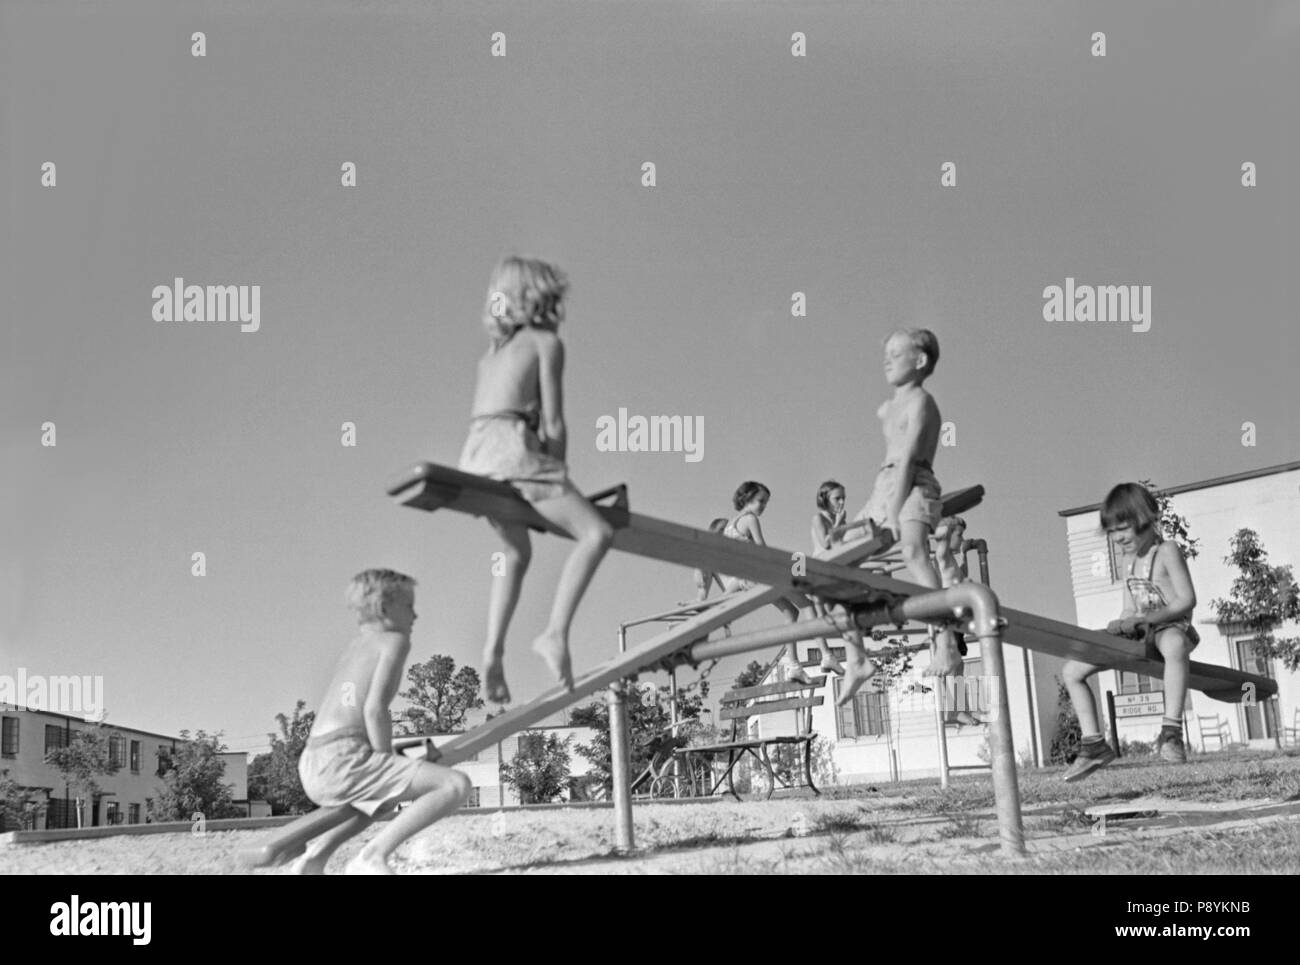 Children on Seesaw at Playground, Greenbelt, Maryland, USA, Marion Post Wolcott, Farm Security Administration, September 1938 Stock Photo